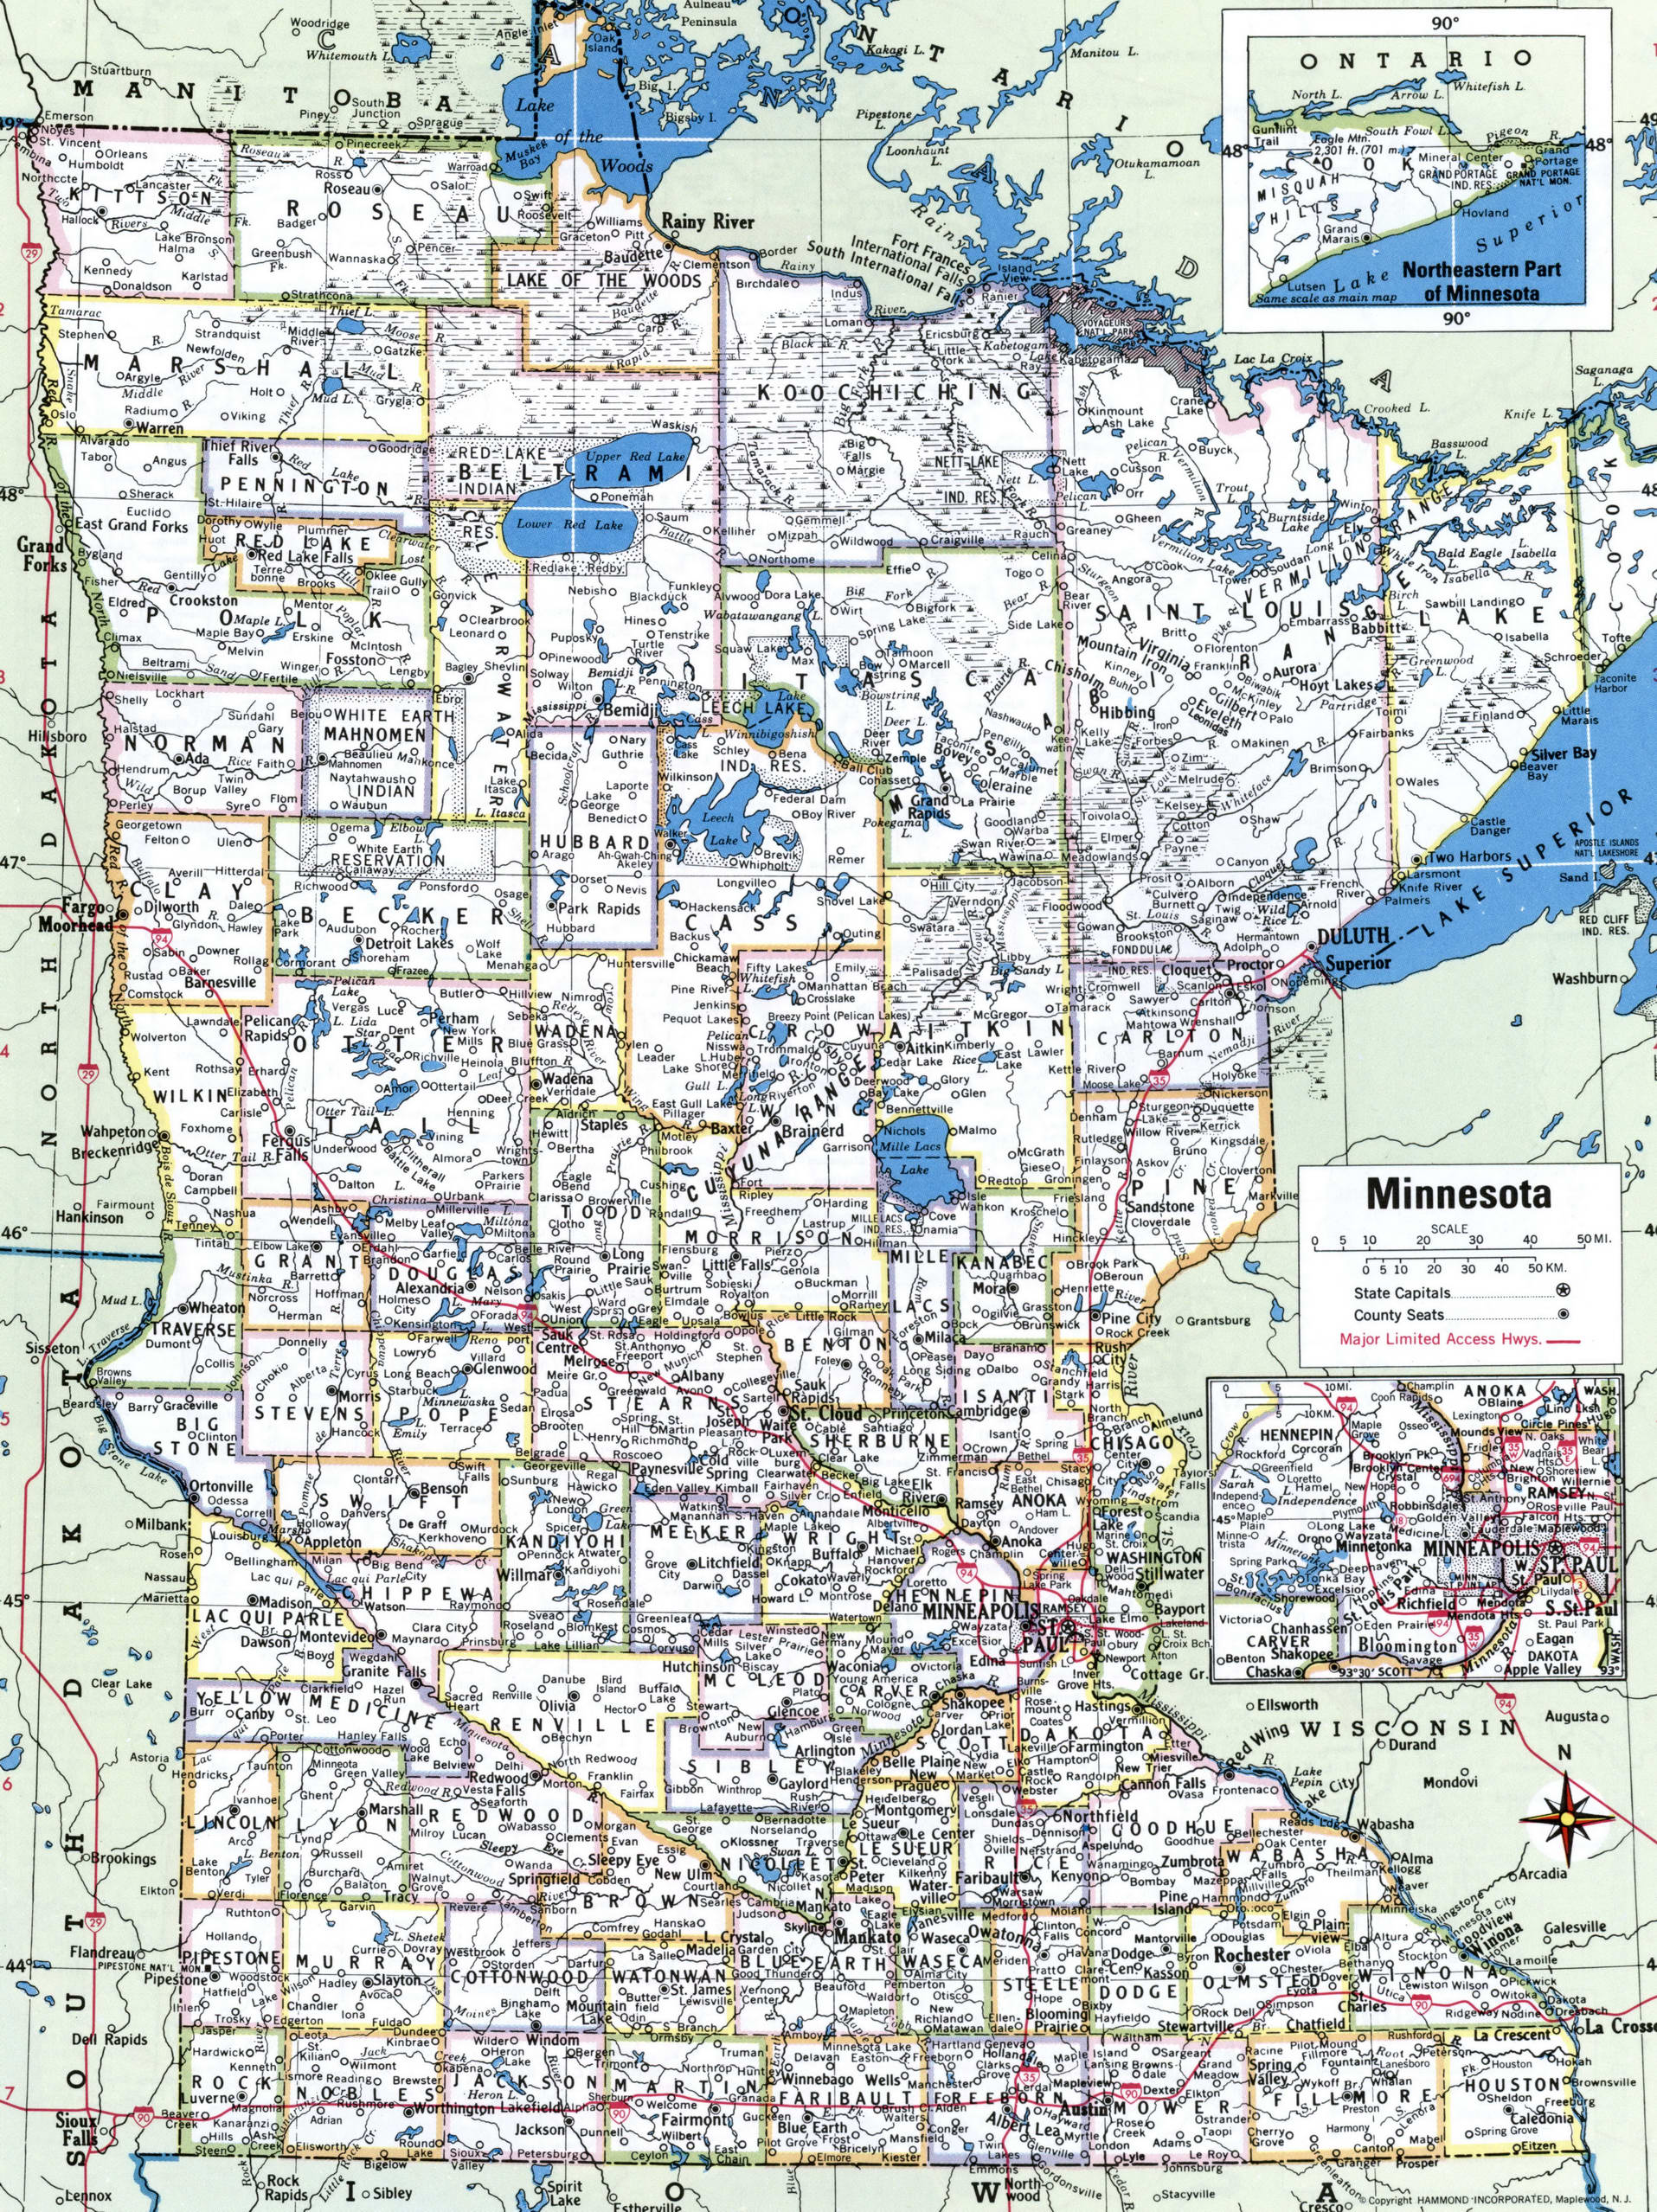 Minnesota map with counties